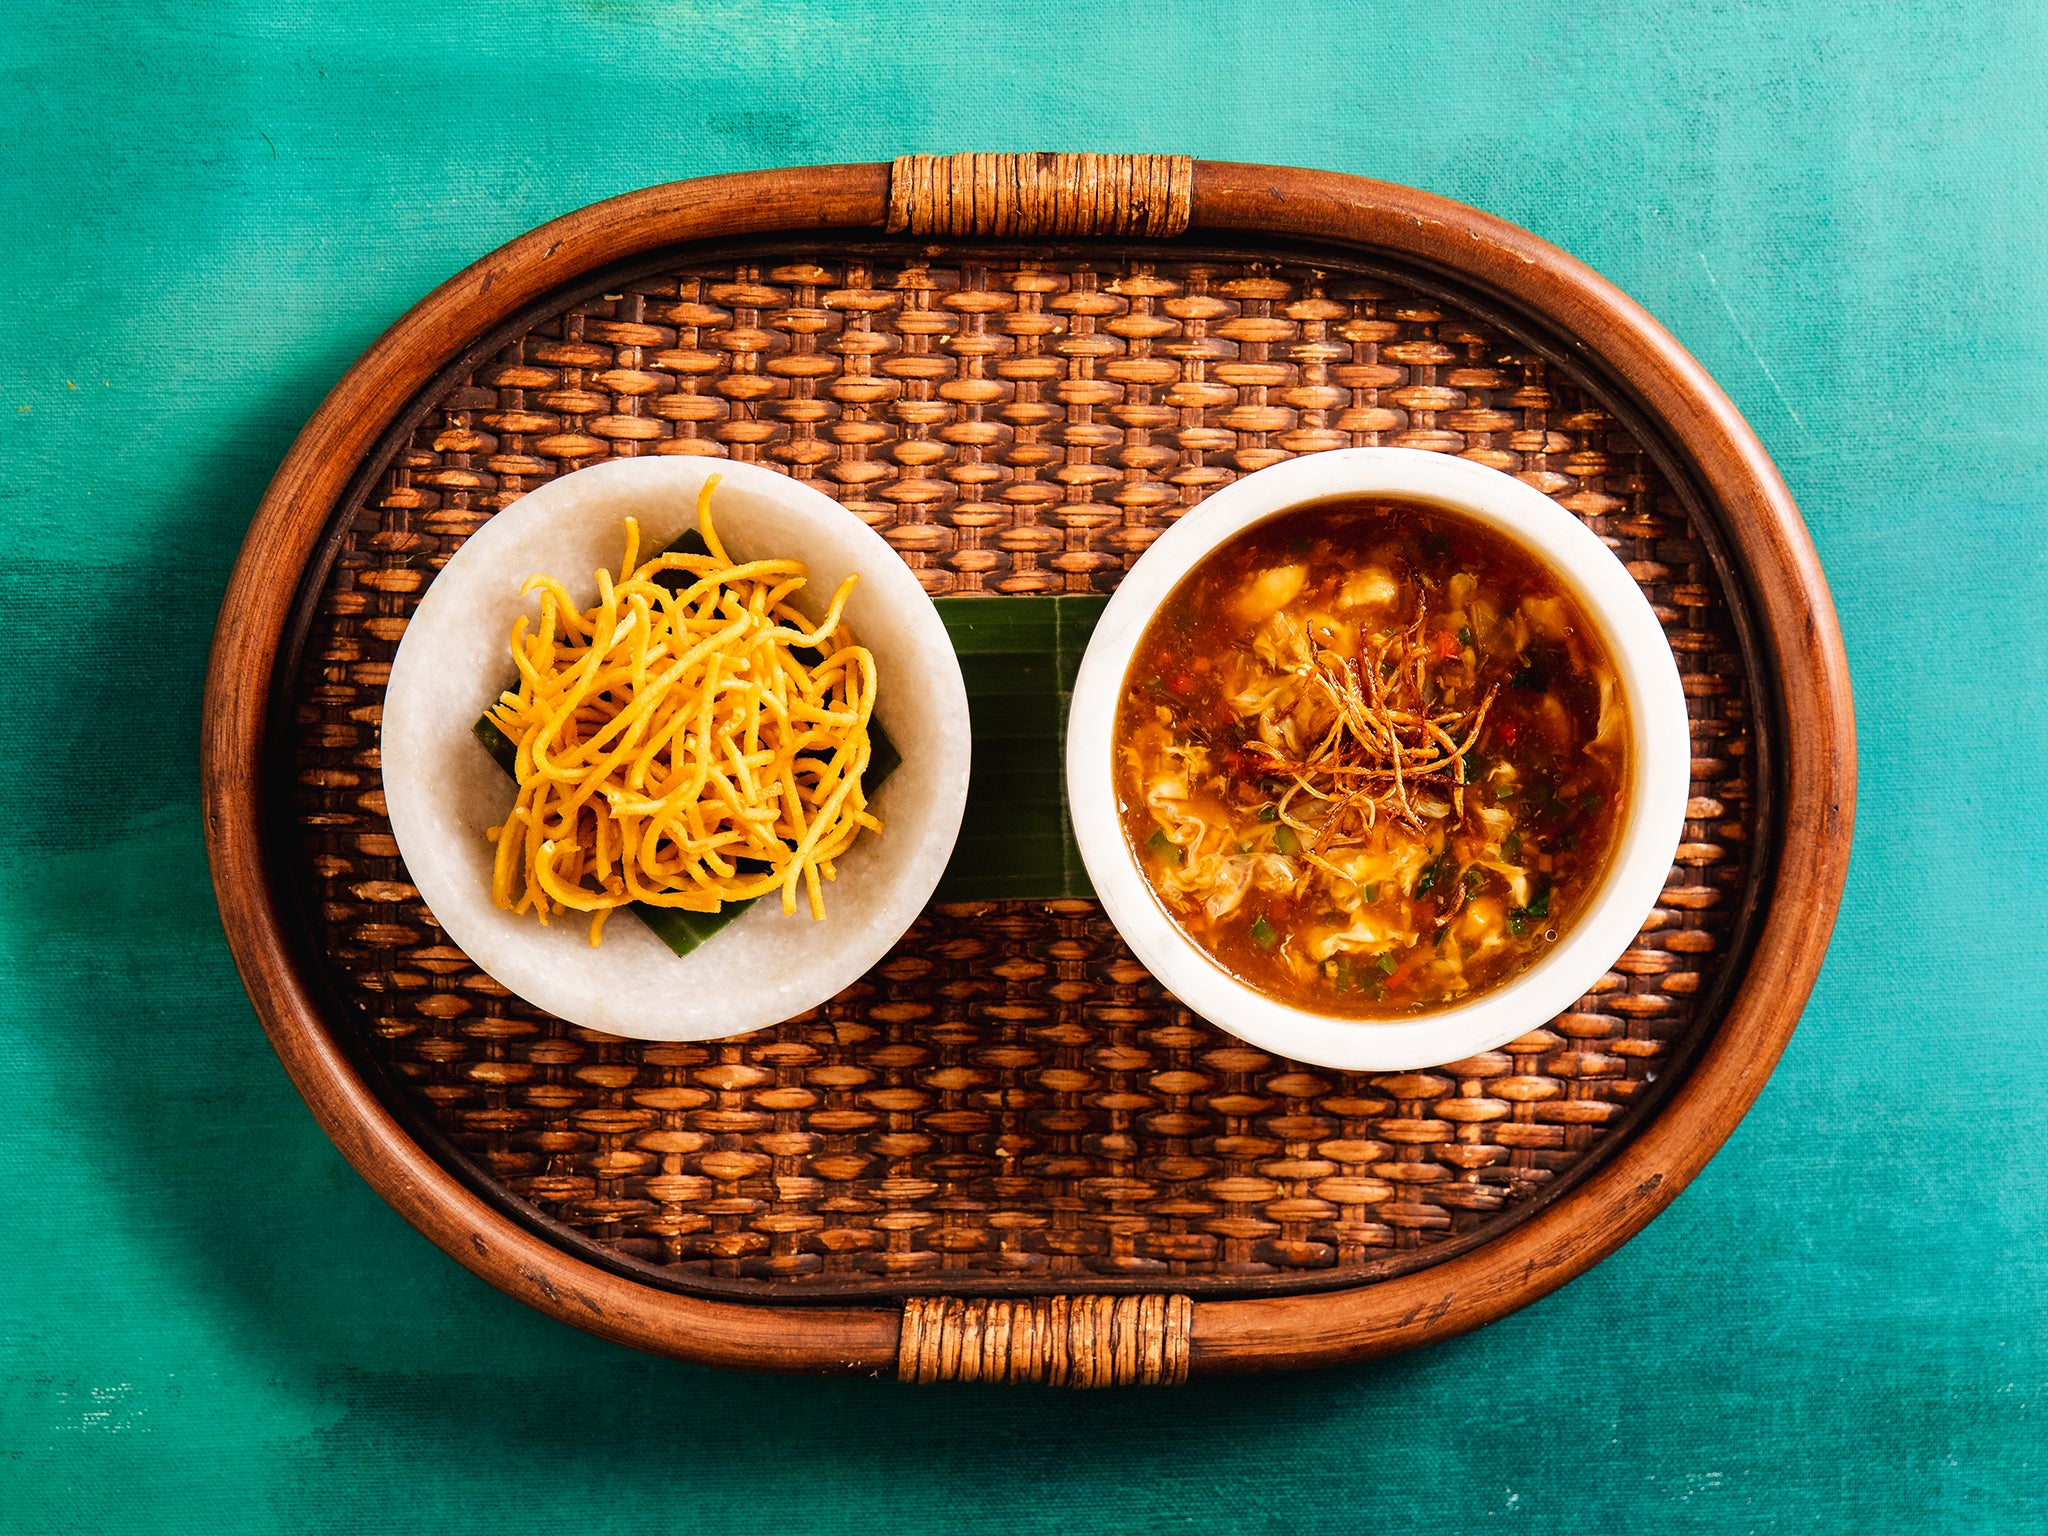 Manchow soup is a popular Indo-Chinese dish thanks to its easy preparation and hot and spicy taste